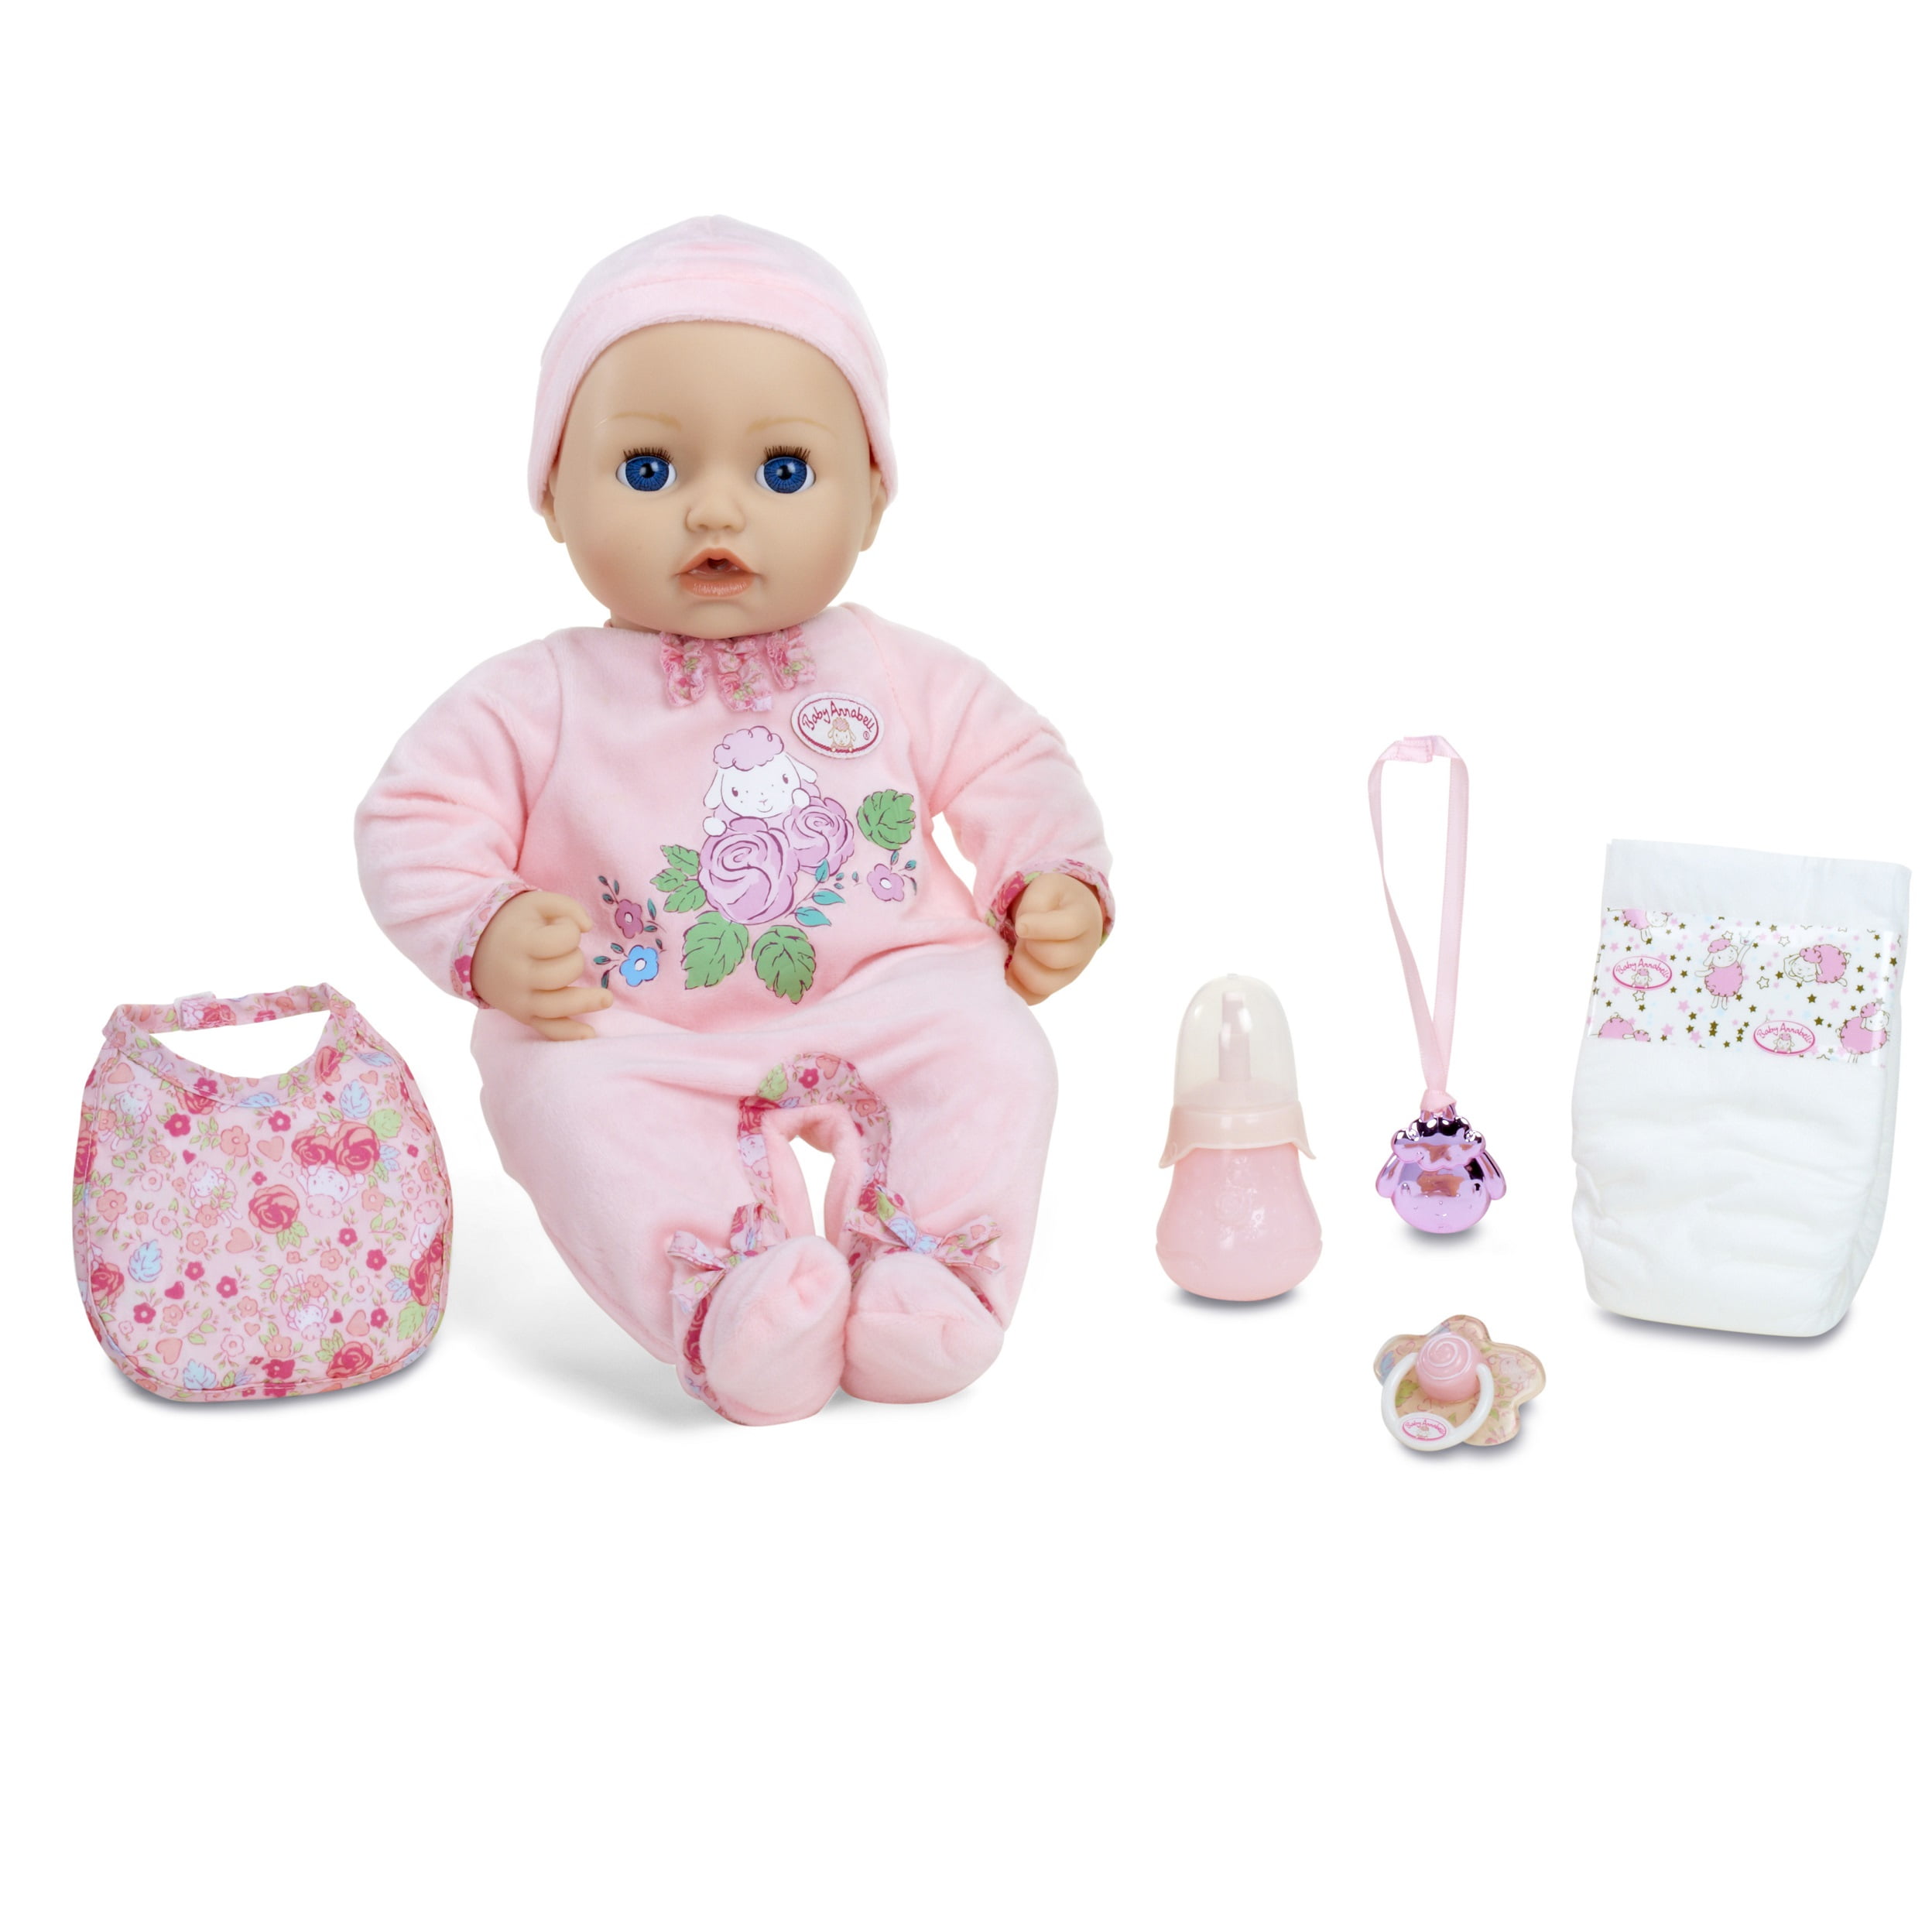 18" New Born Soft Bodied Baby Doll Toy with Dummy Baby Sounds Crying Talking 